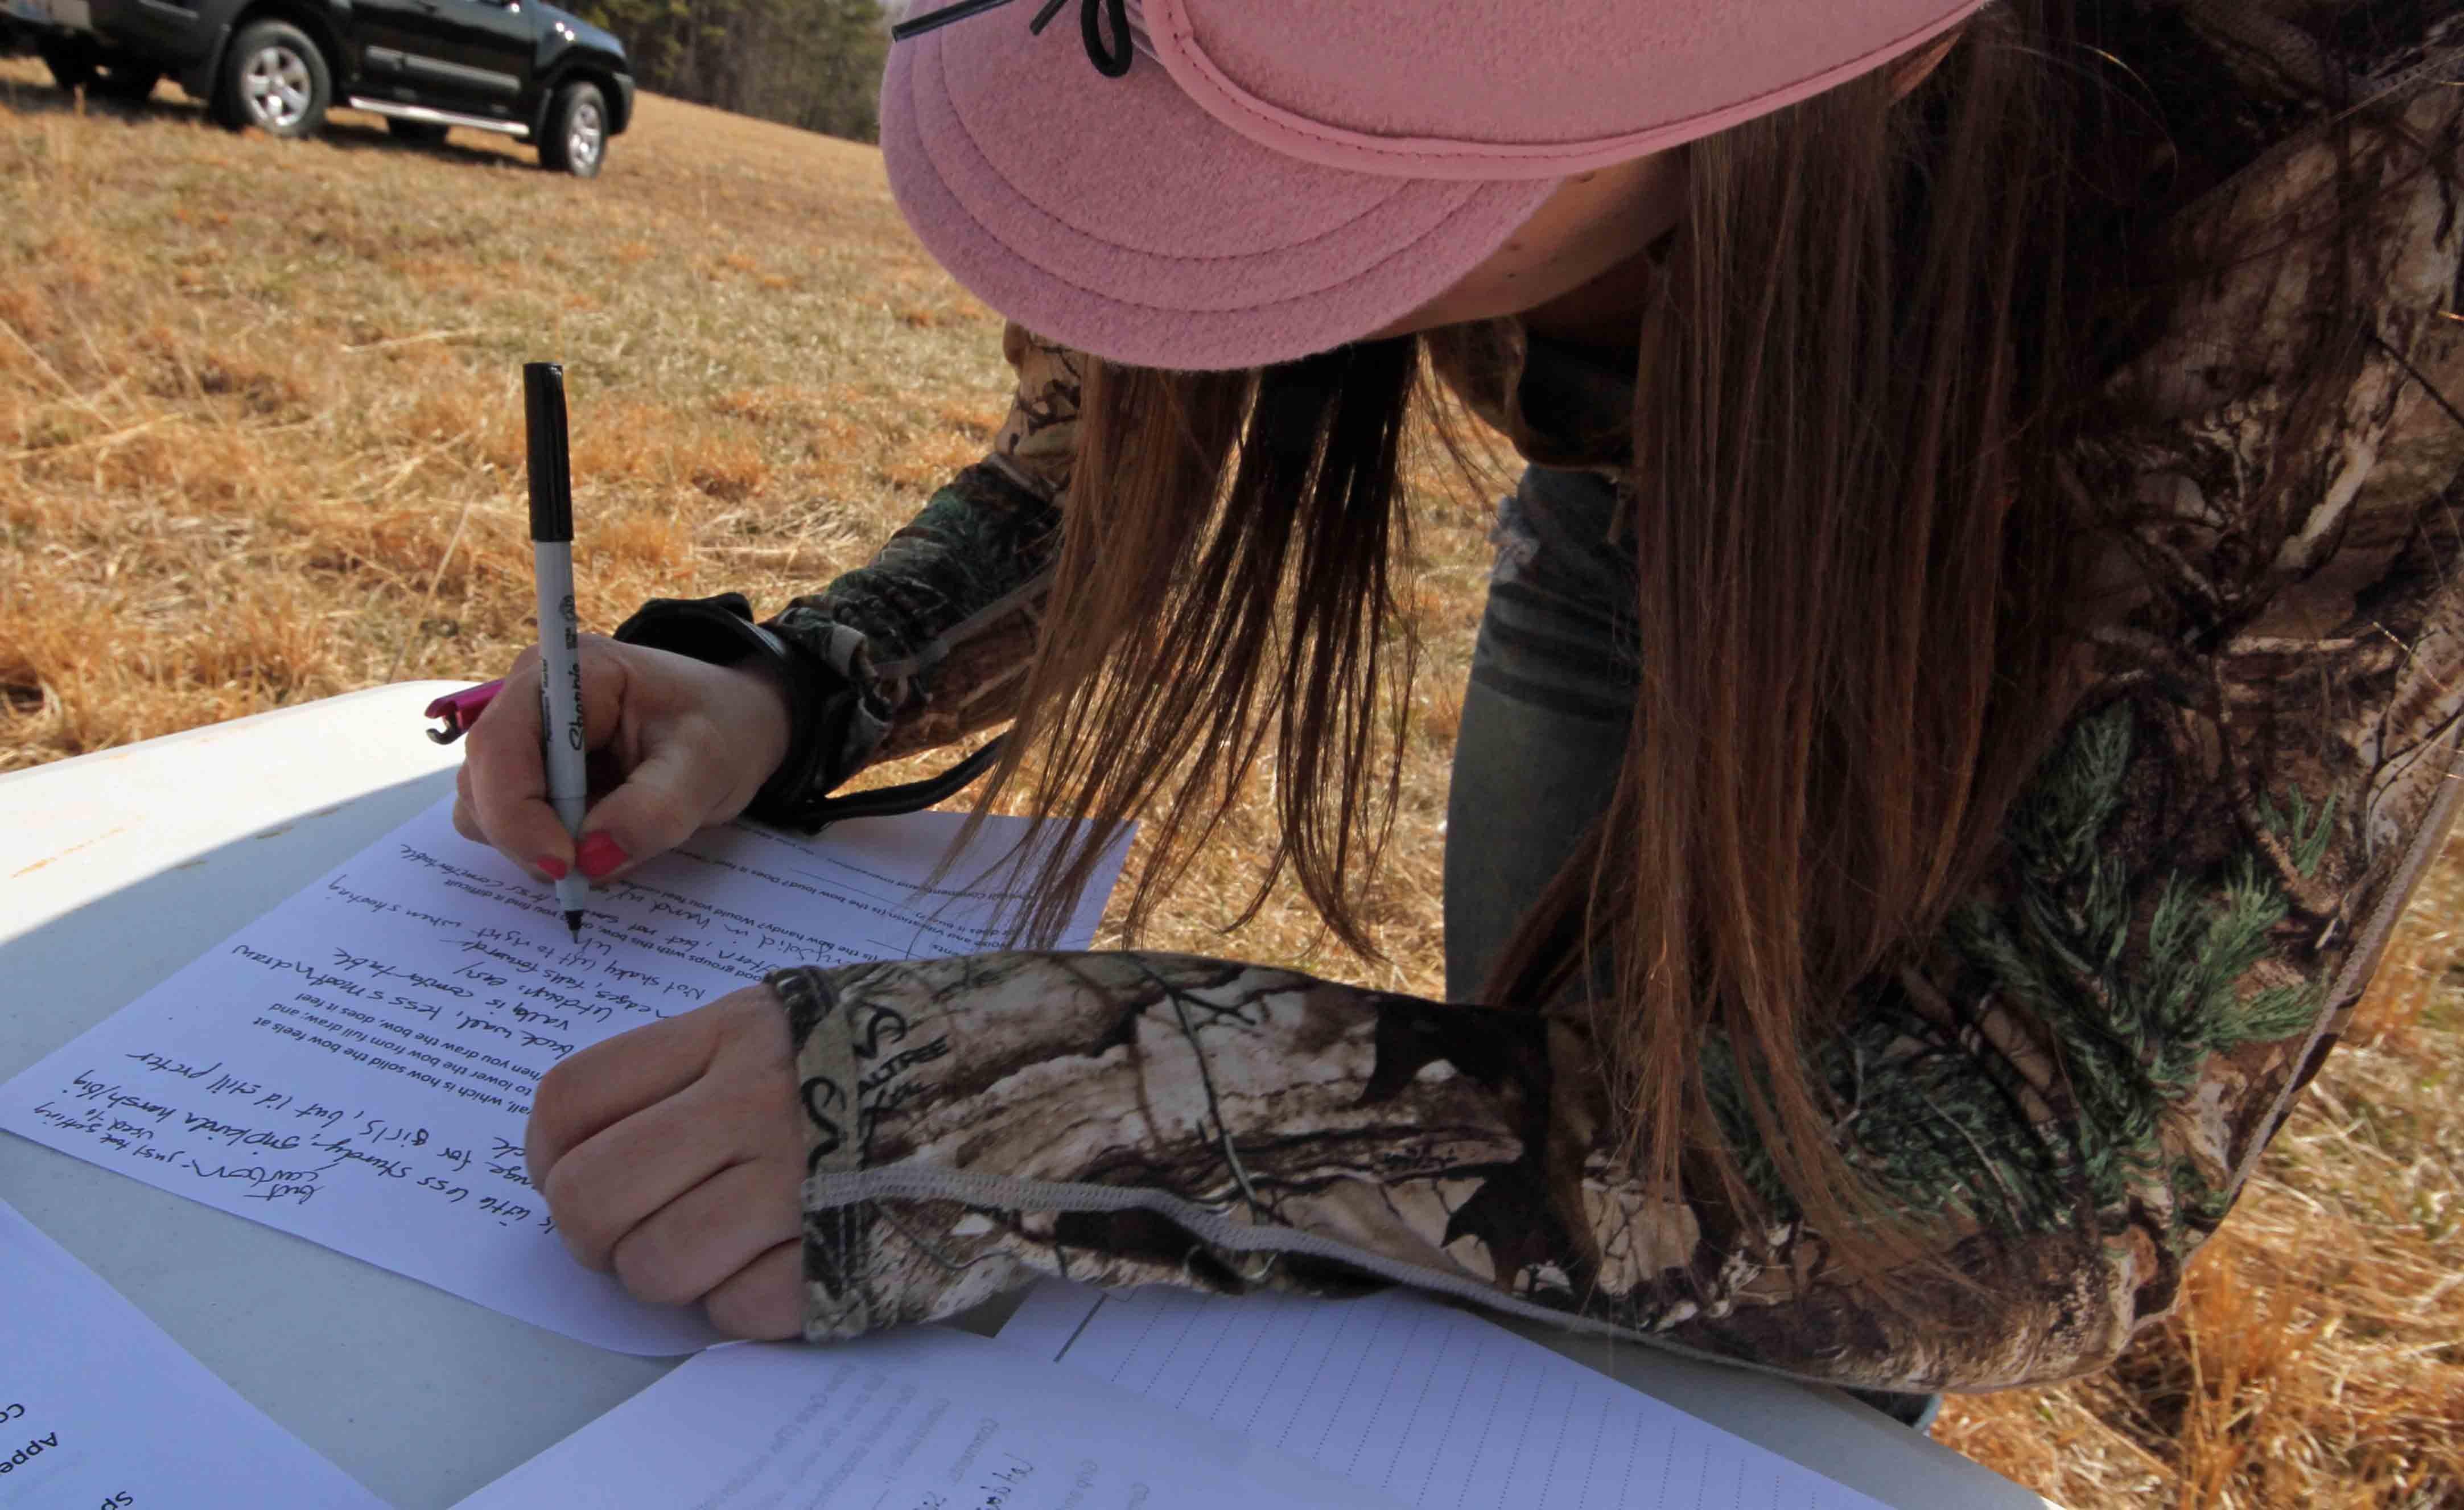 Bows for Women: 2014 Review - Realtree Store